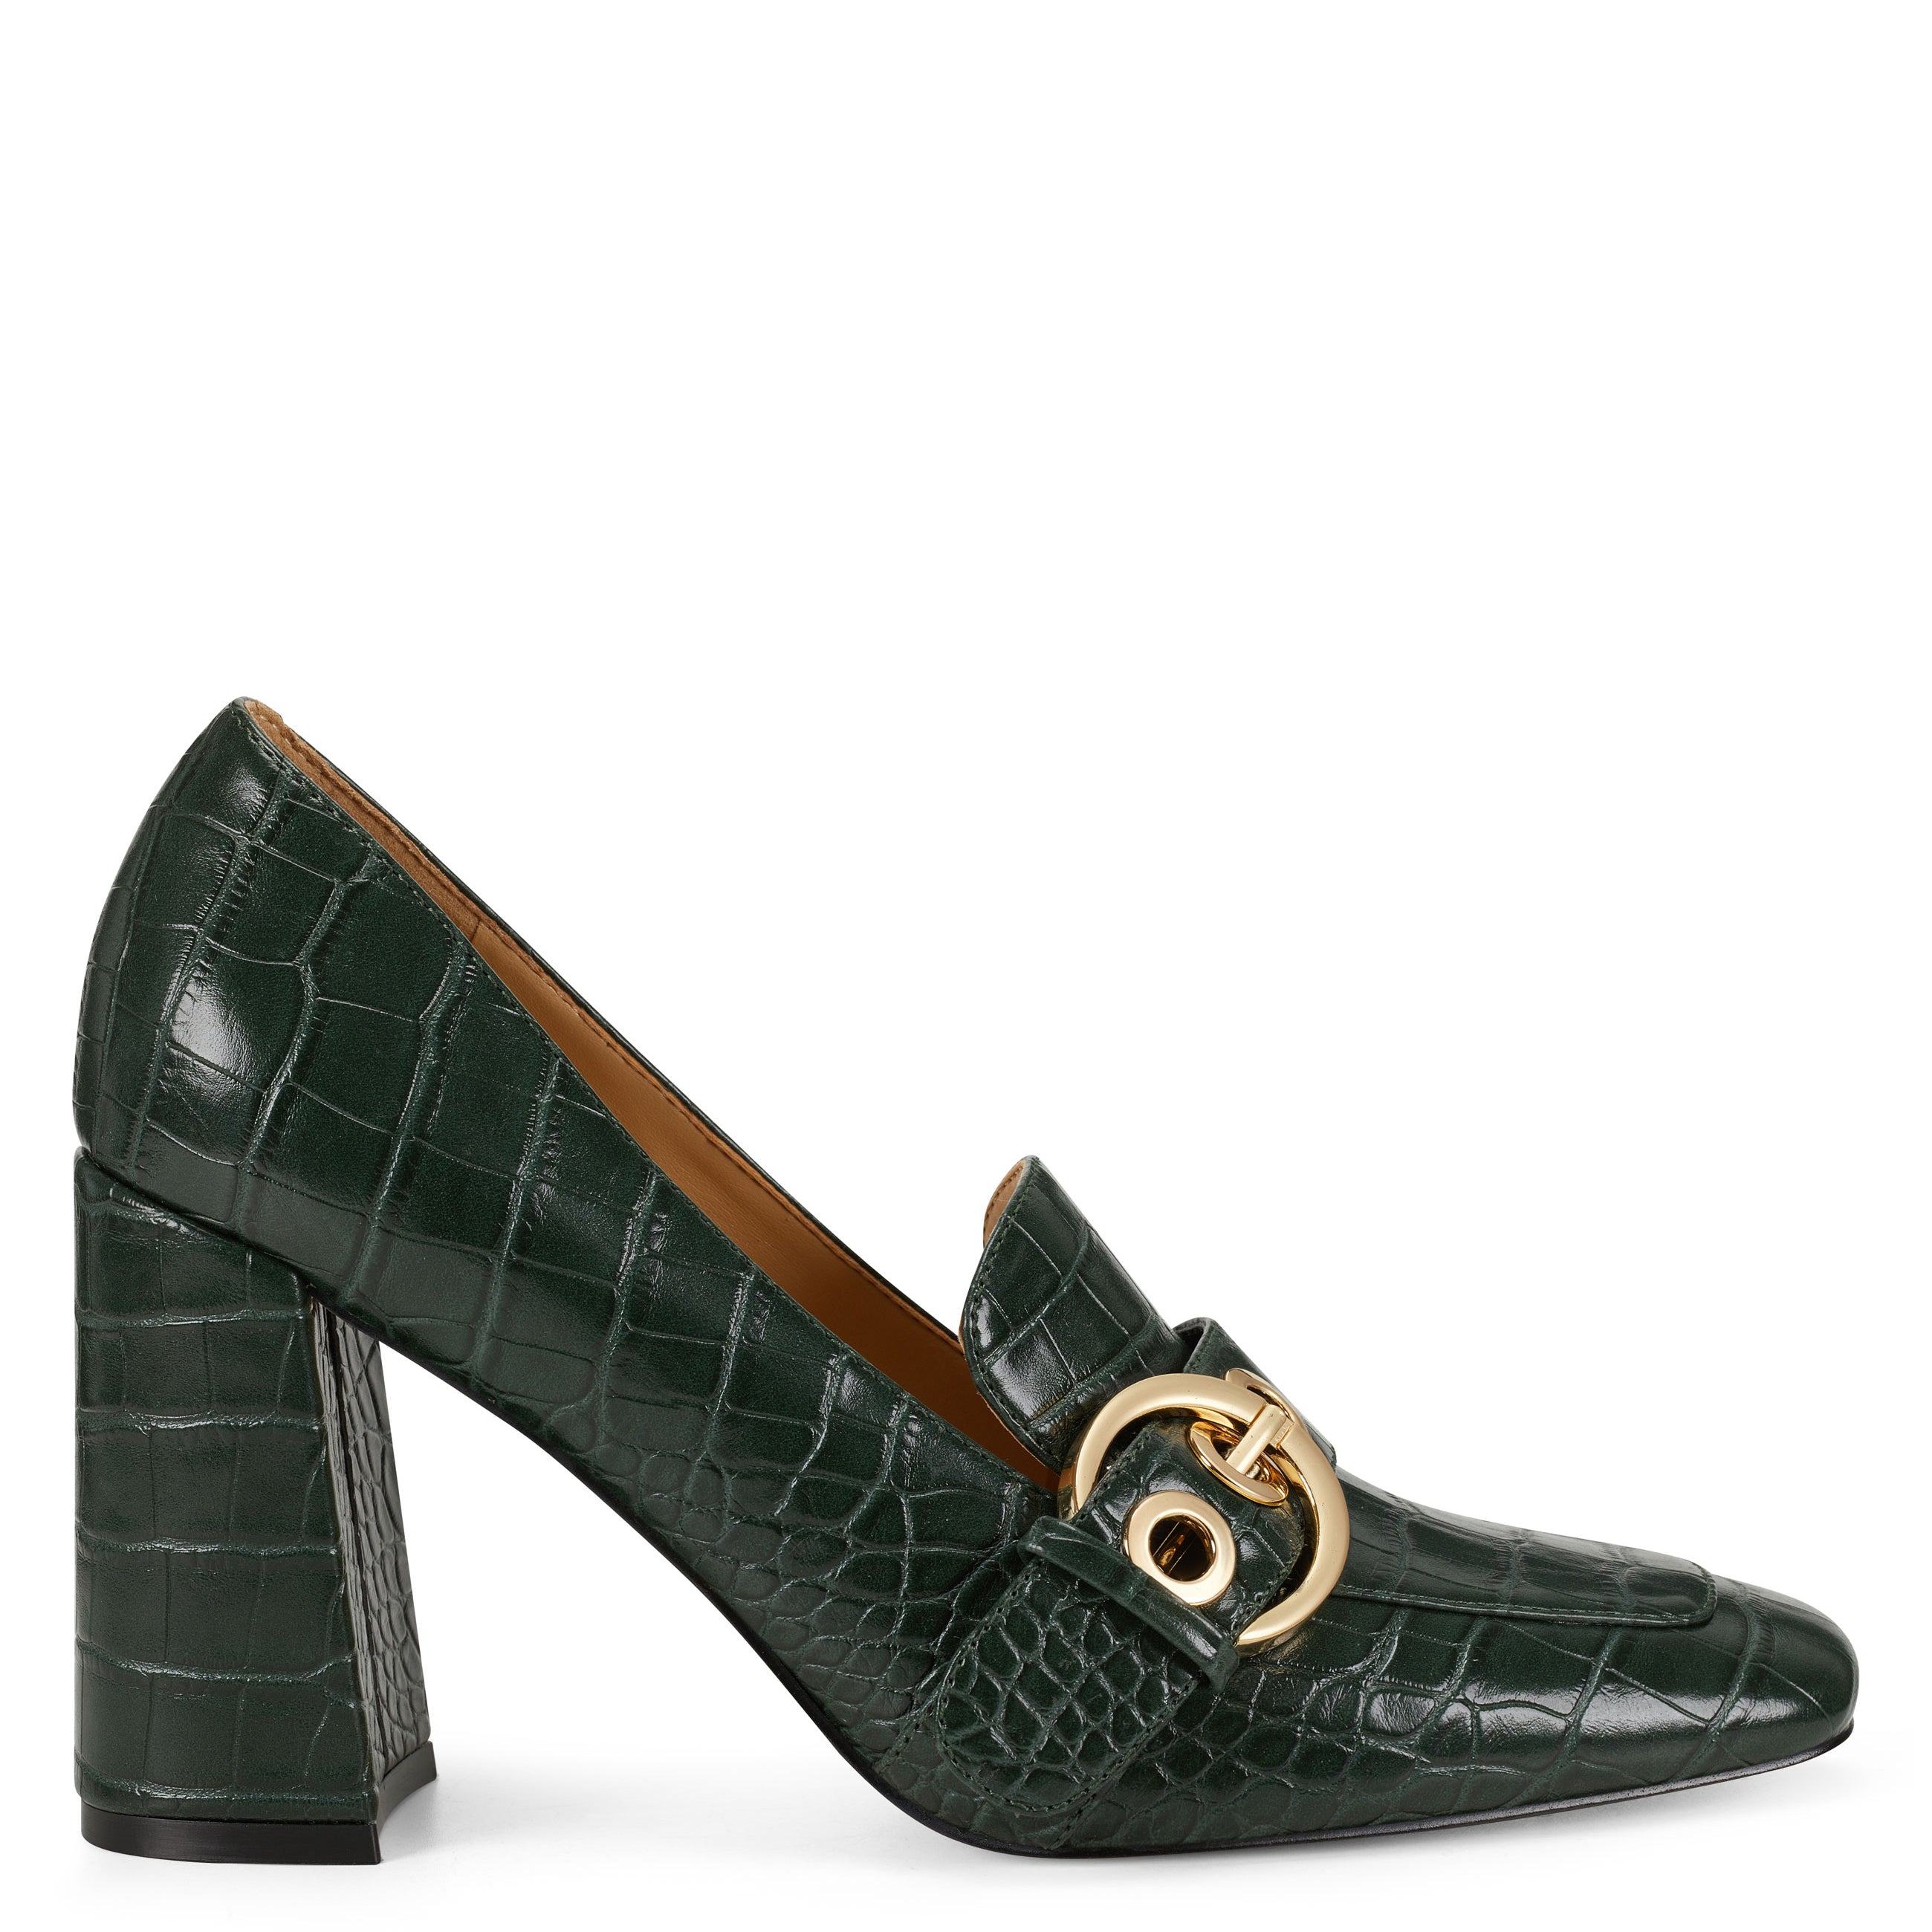 Buy > nine west heeled loafers > in stock